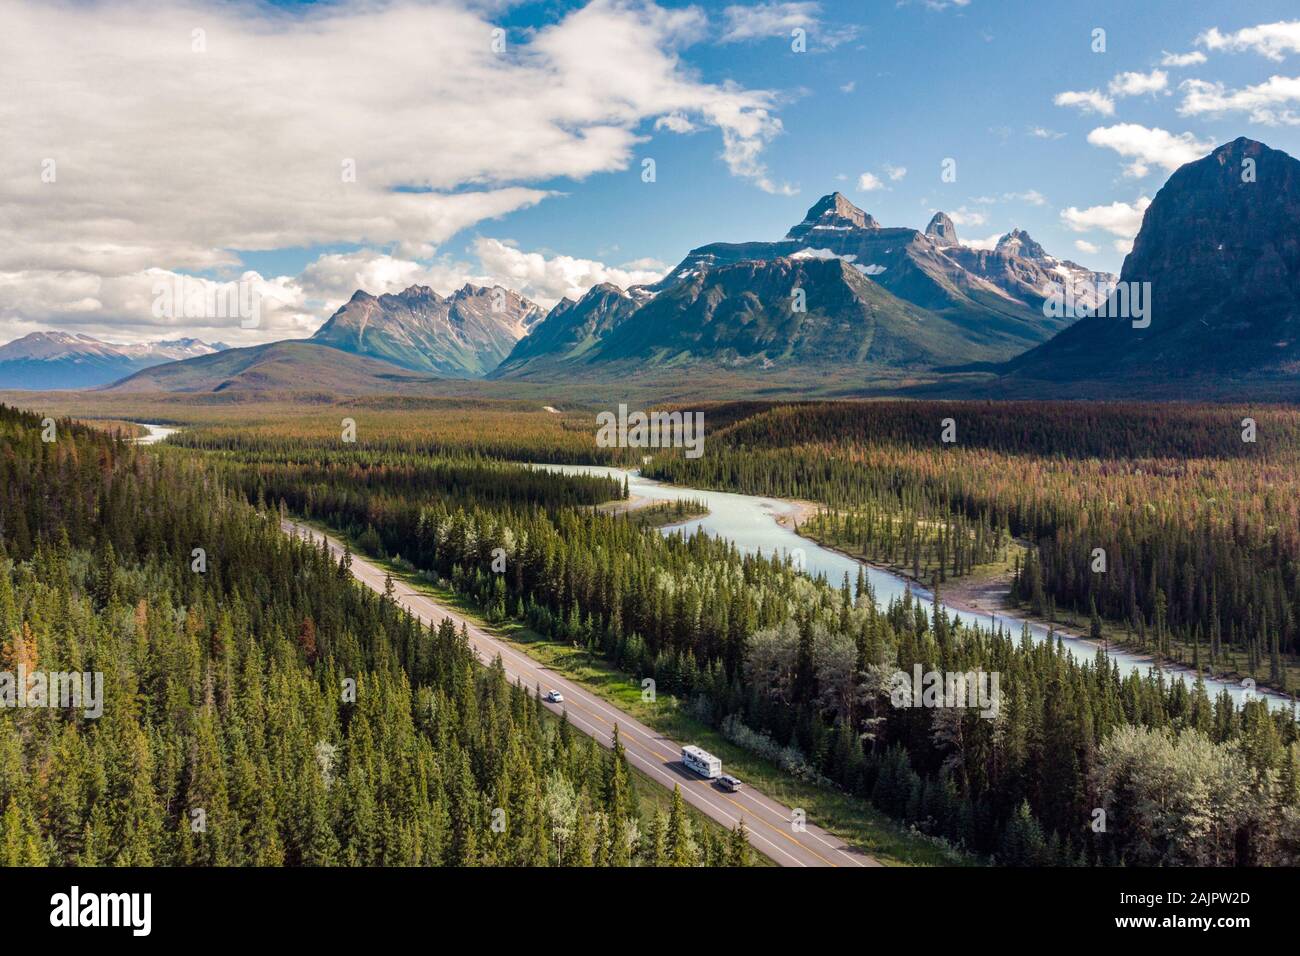 Aerial view of Banff National Park during summer, Canadian Rockies, Alberta, Canada. Stock Photo